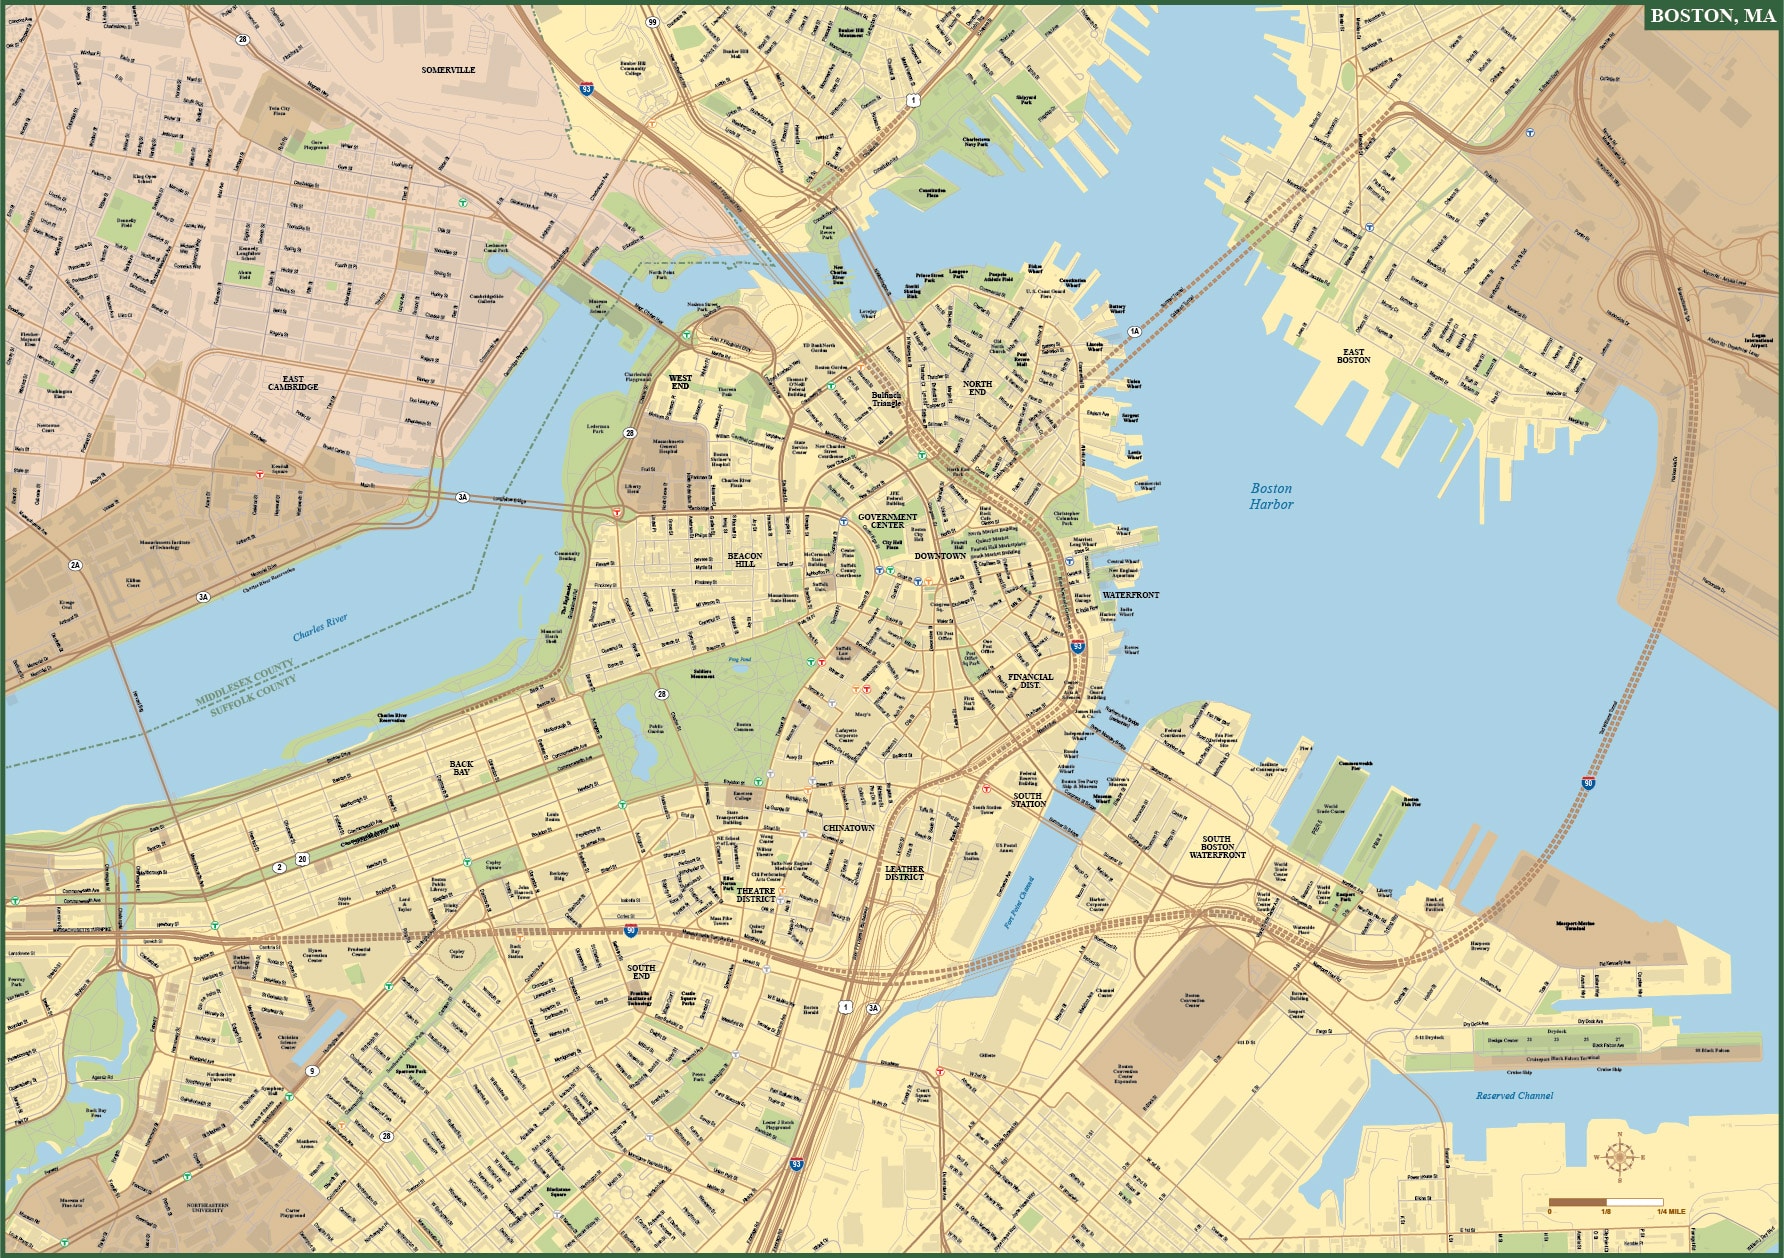 Boston Downtown With Buildings Map1 